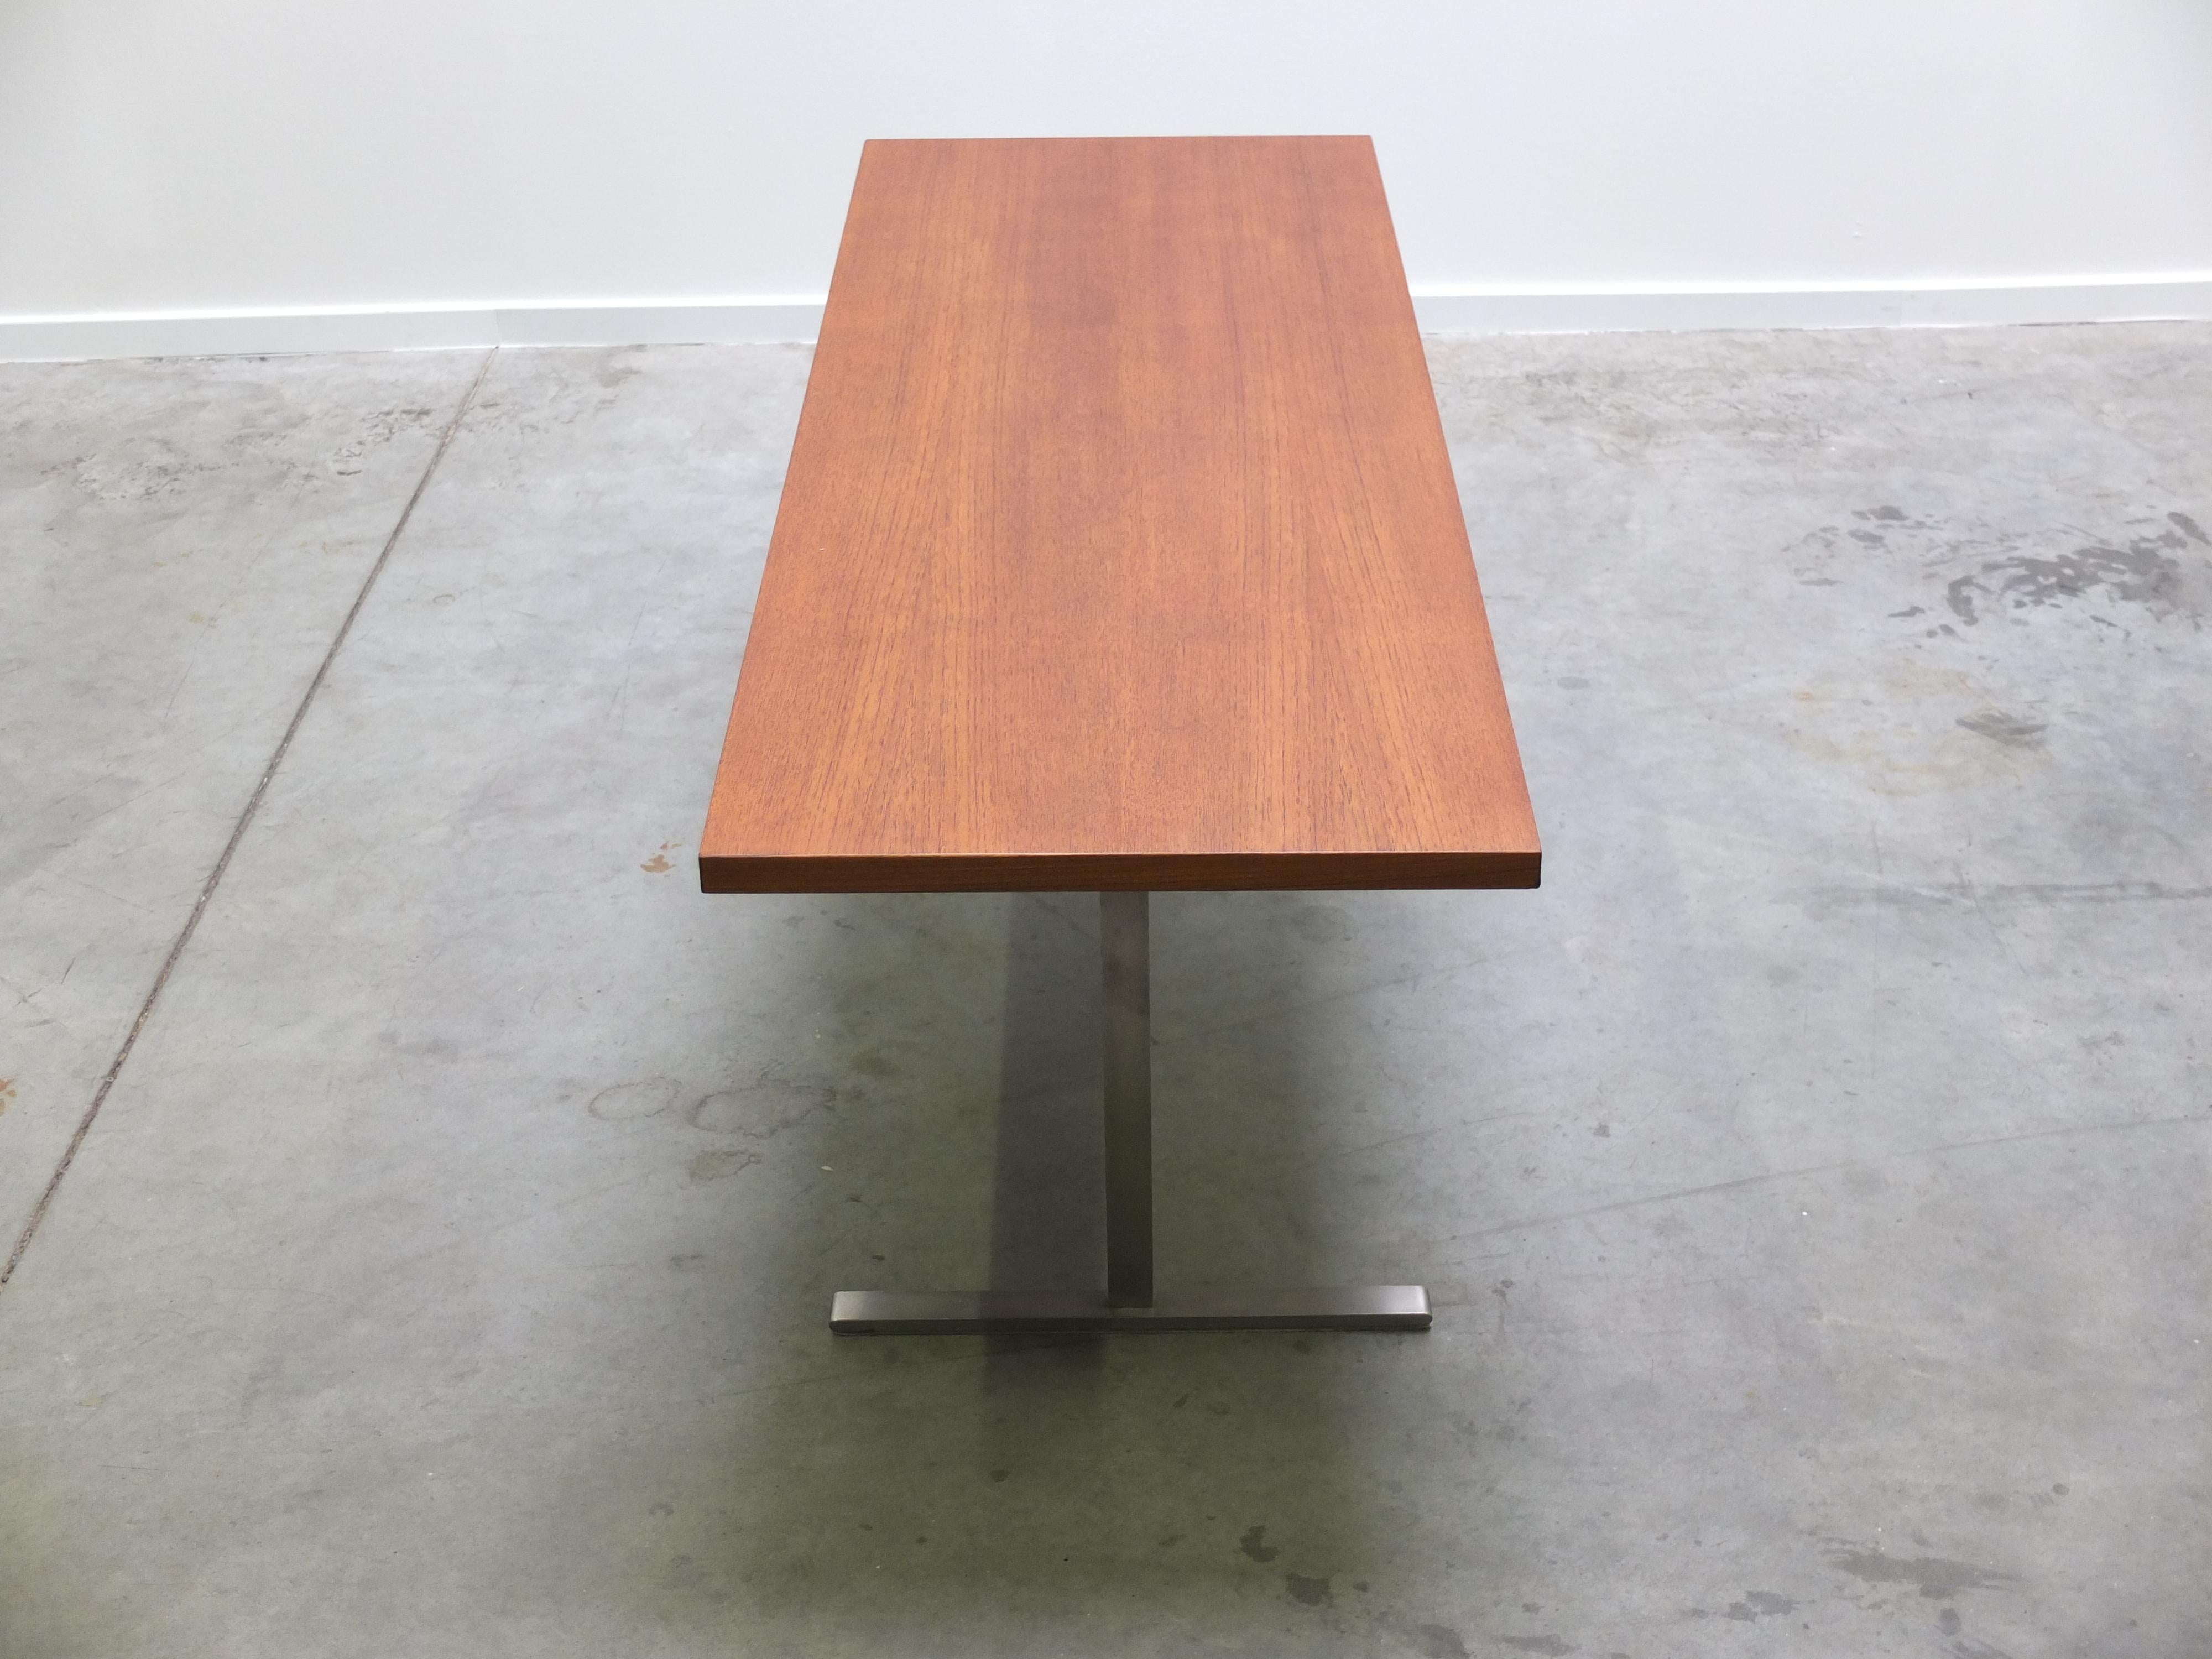 20th Century Large Modernist Teak Coffee Table in the Style of Arne Jacobsen, 1960s For Sale